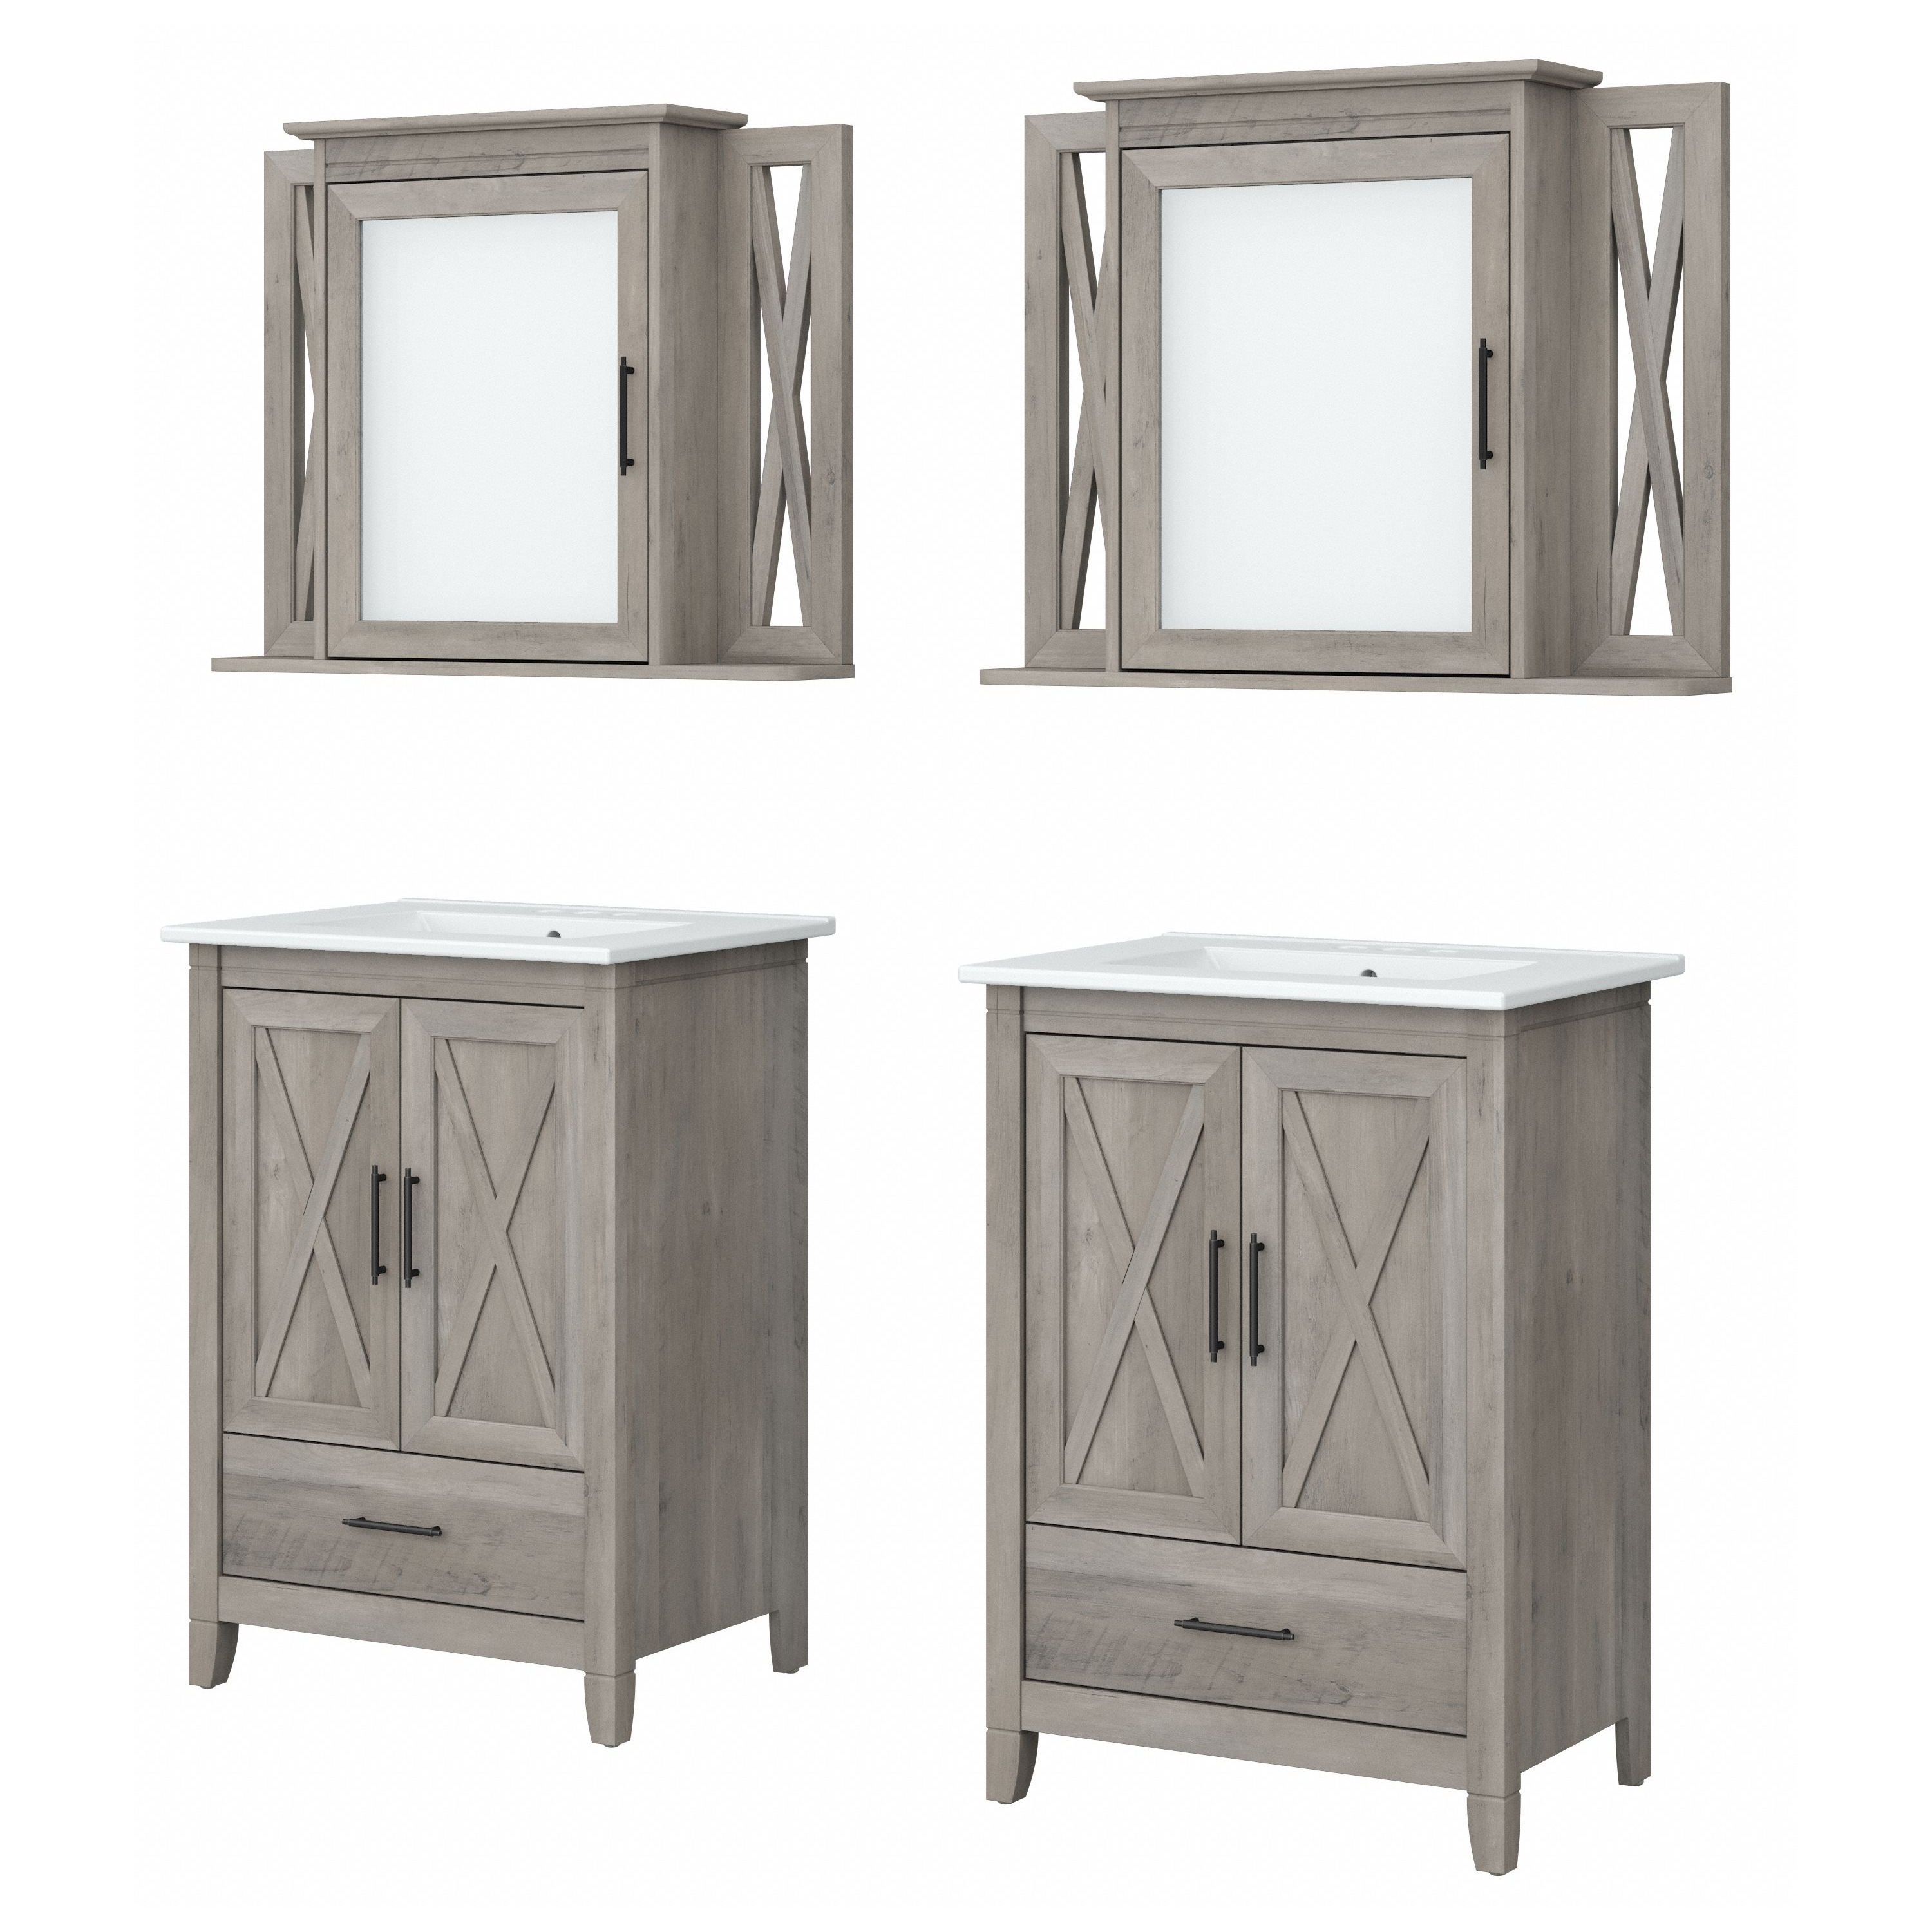 Shop Bush Furniture Key West 48W Double Vanity Set with Sinks and Medicine Cabinets 02 KWS041DG #color_driftwood gray